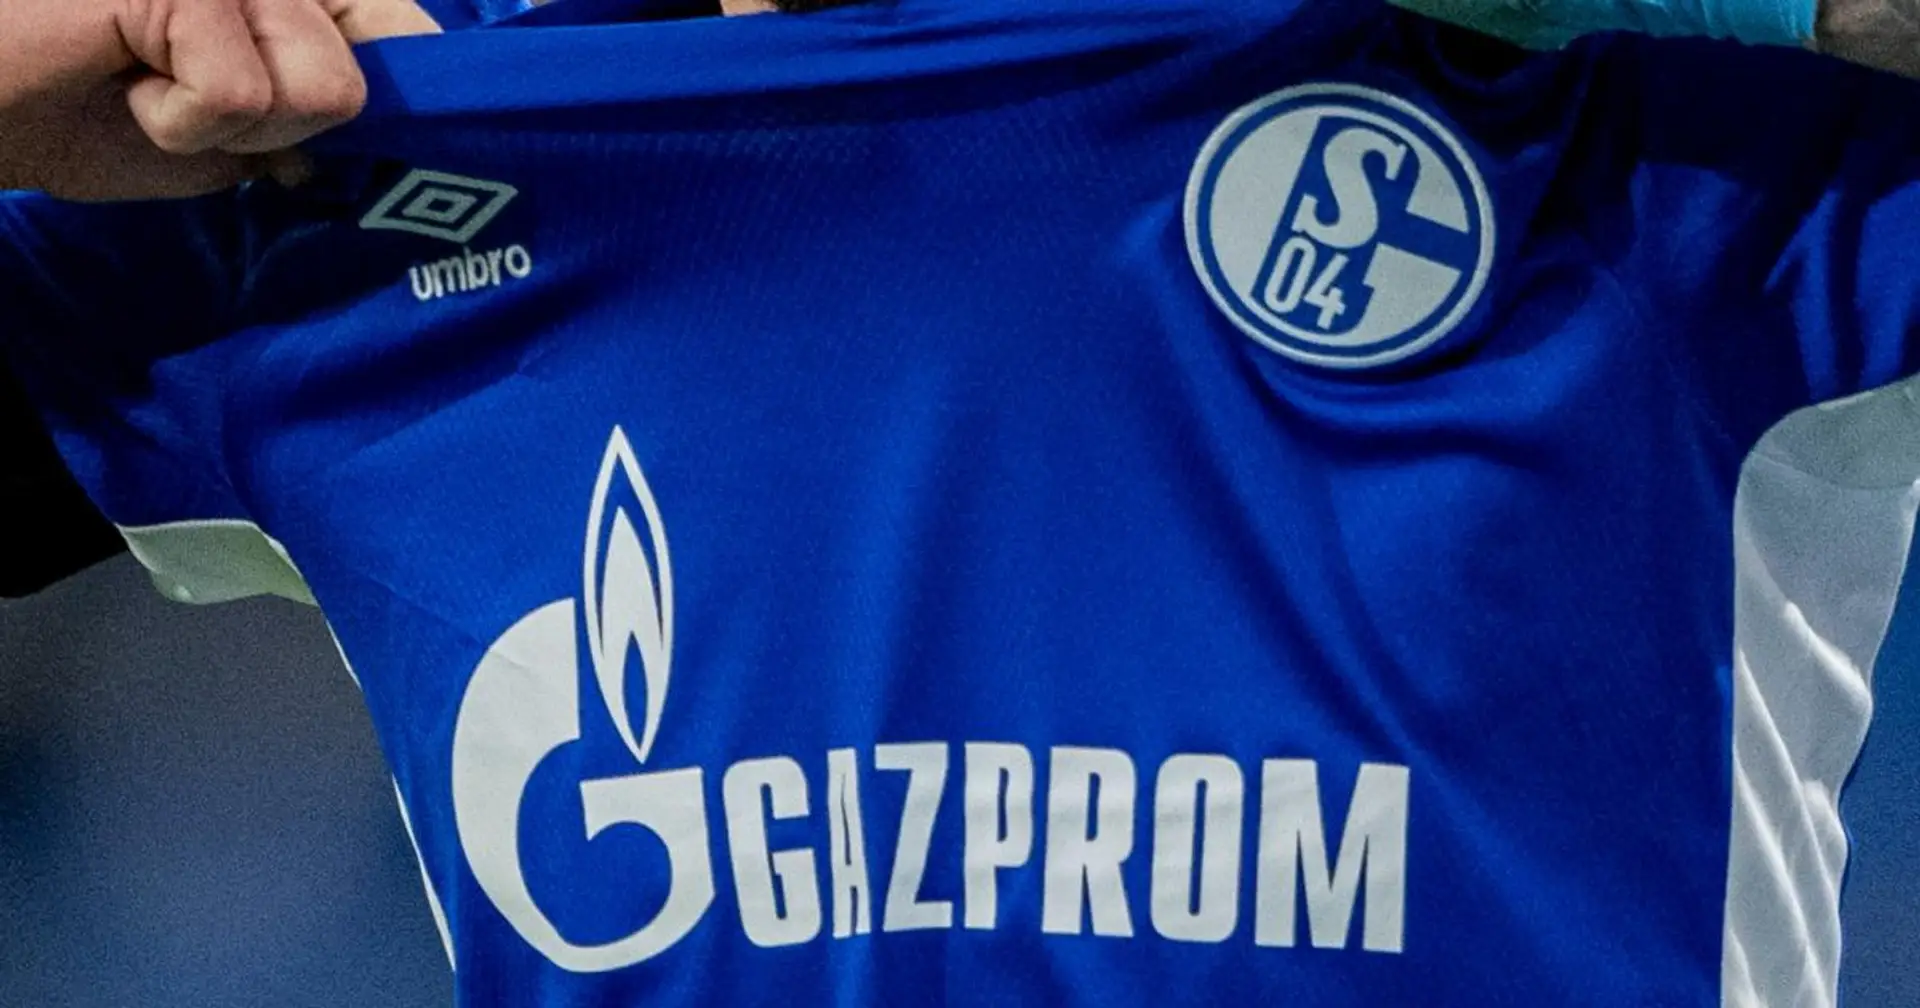 OFFICIAL: Schalke remove Gazprom name from team shirts